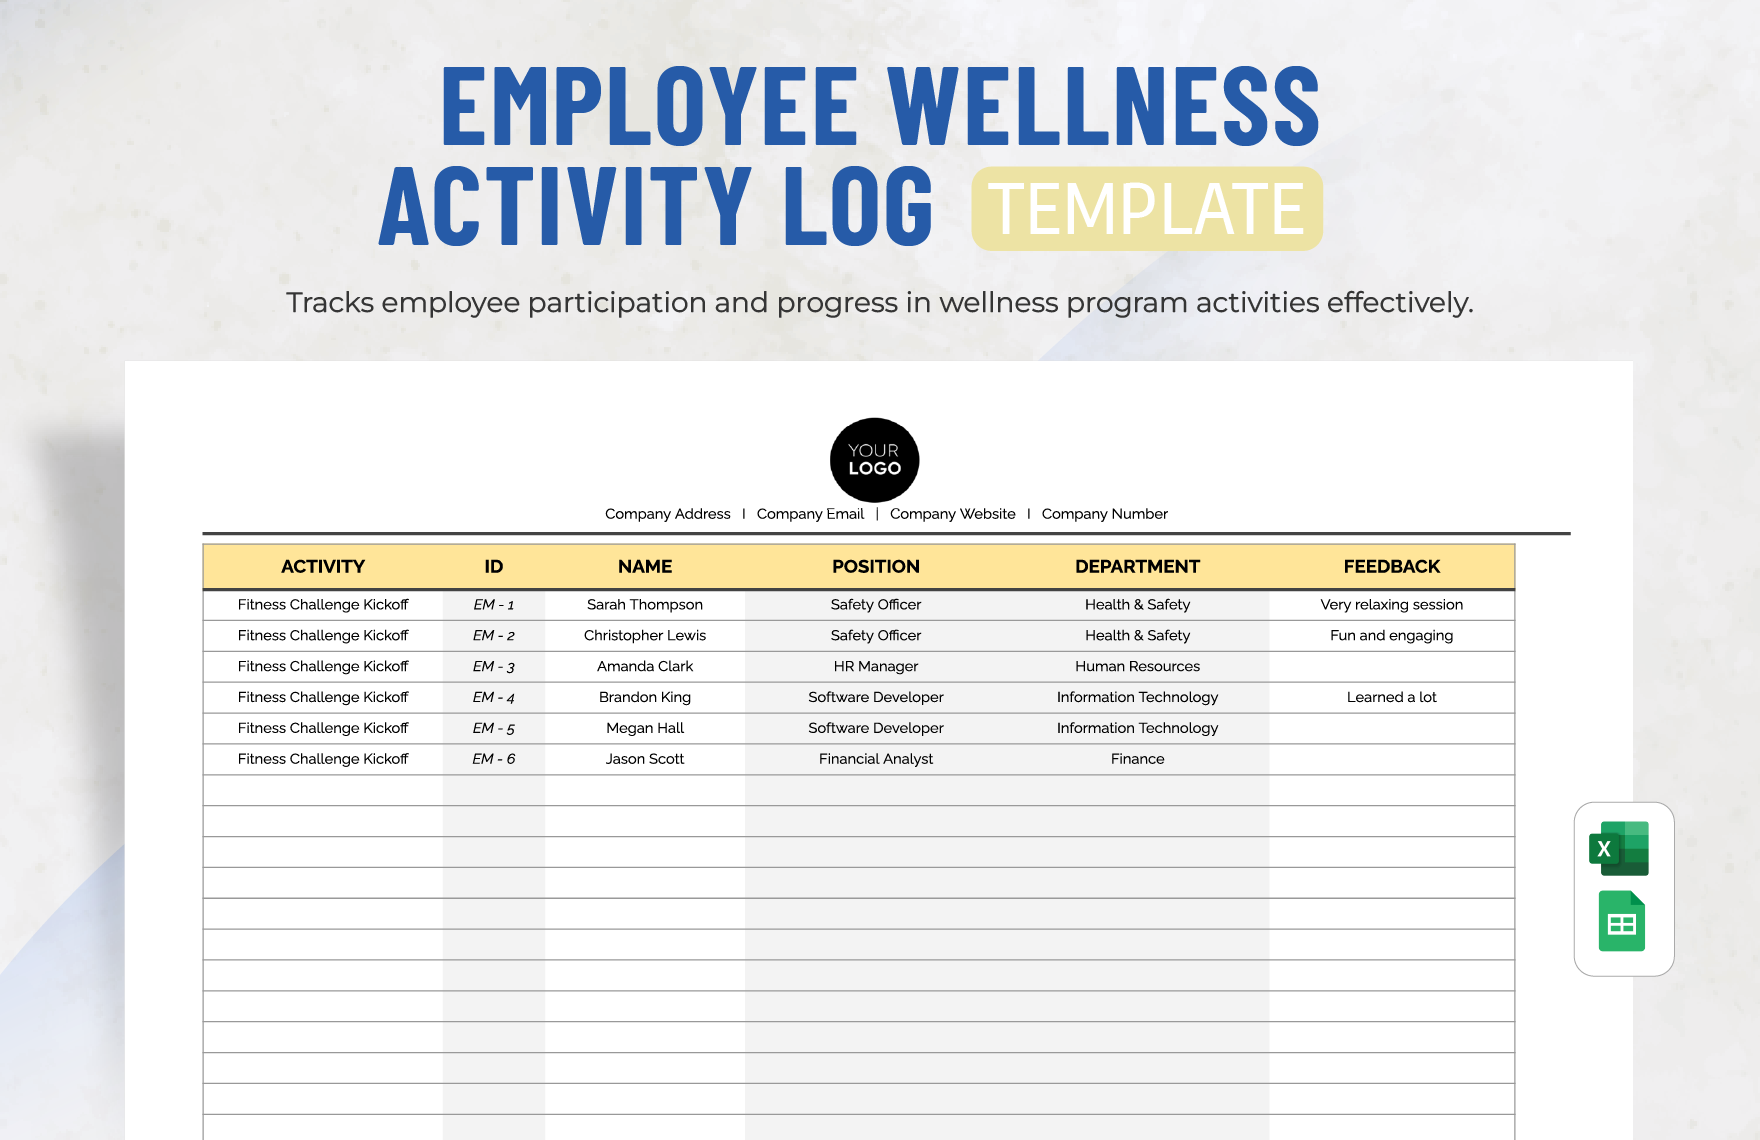 Employee Wellness Activity Log Template in Excel, Google Sheets